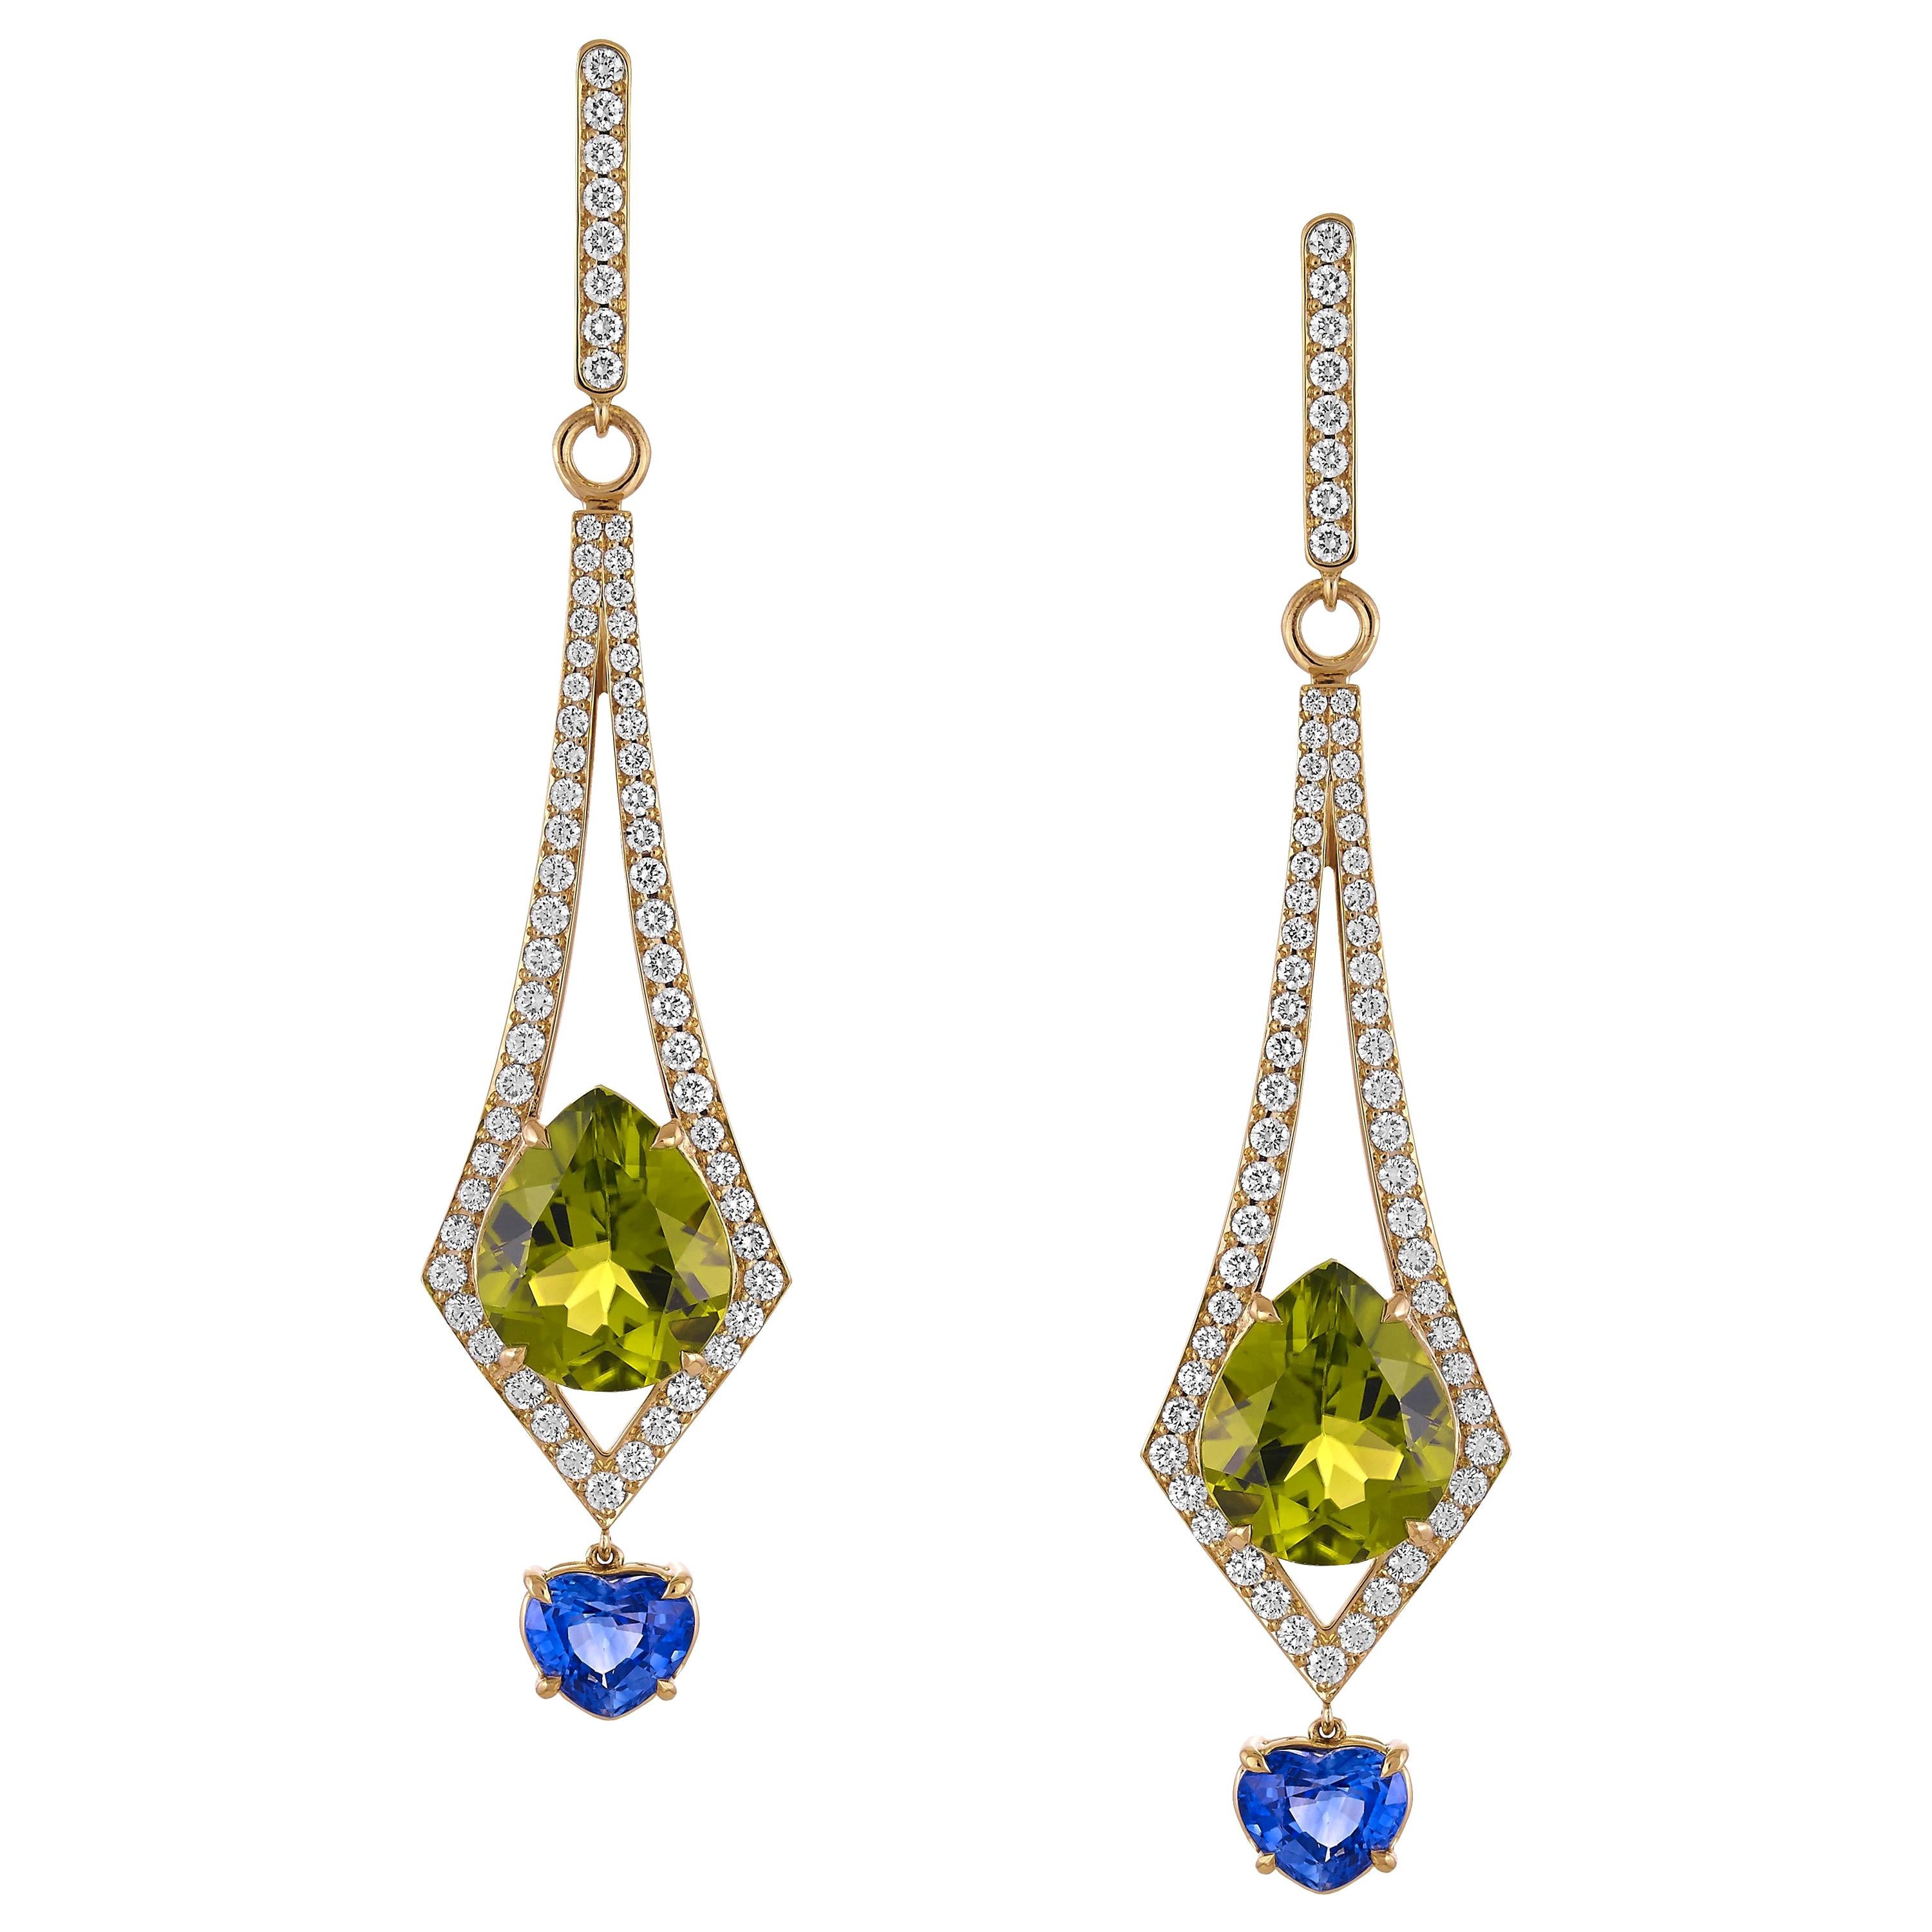 8.57 Carat Peridot and 2.26 Carat Blue Sapphire and Diamond Earrings in 18K Gold